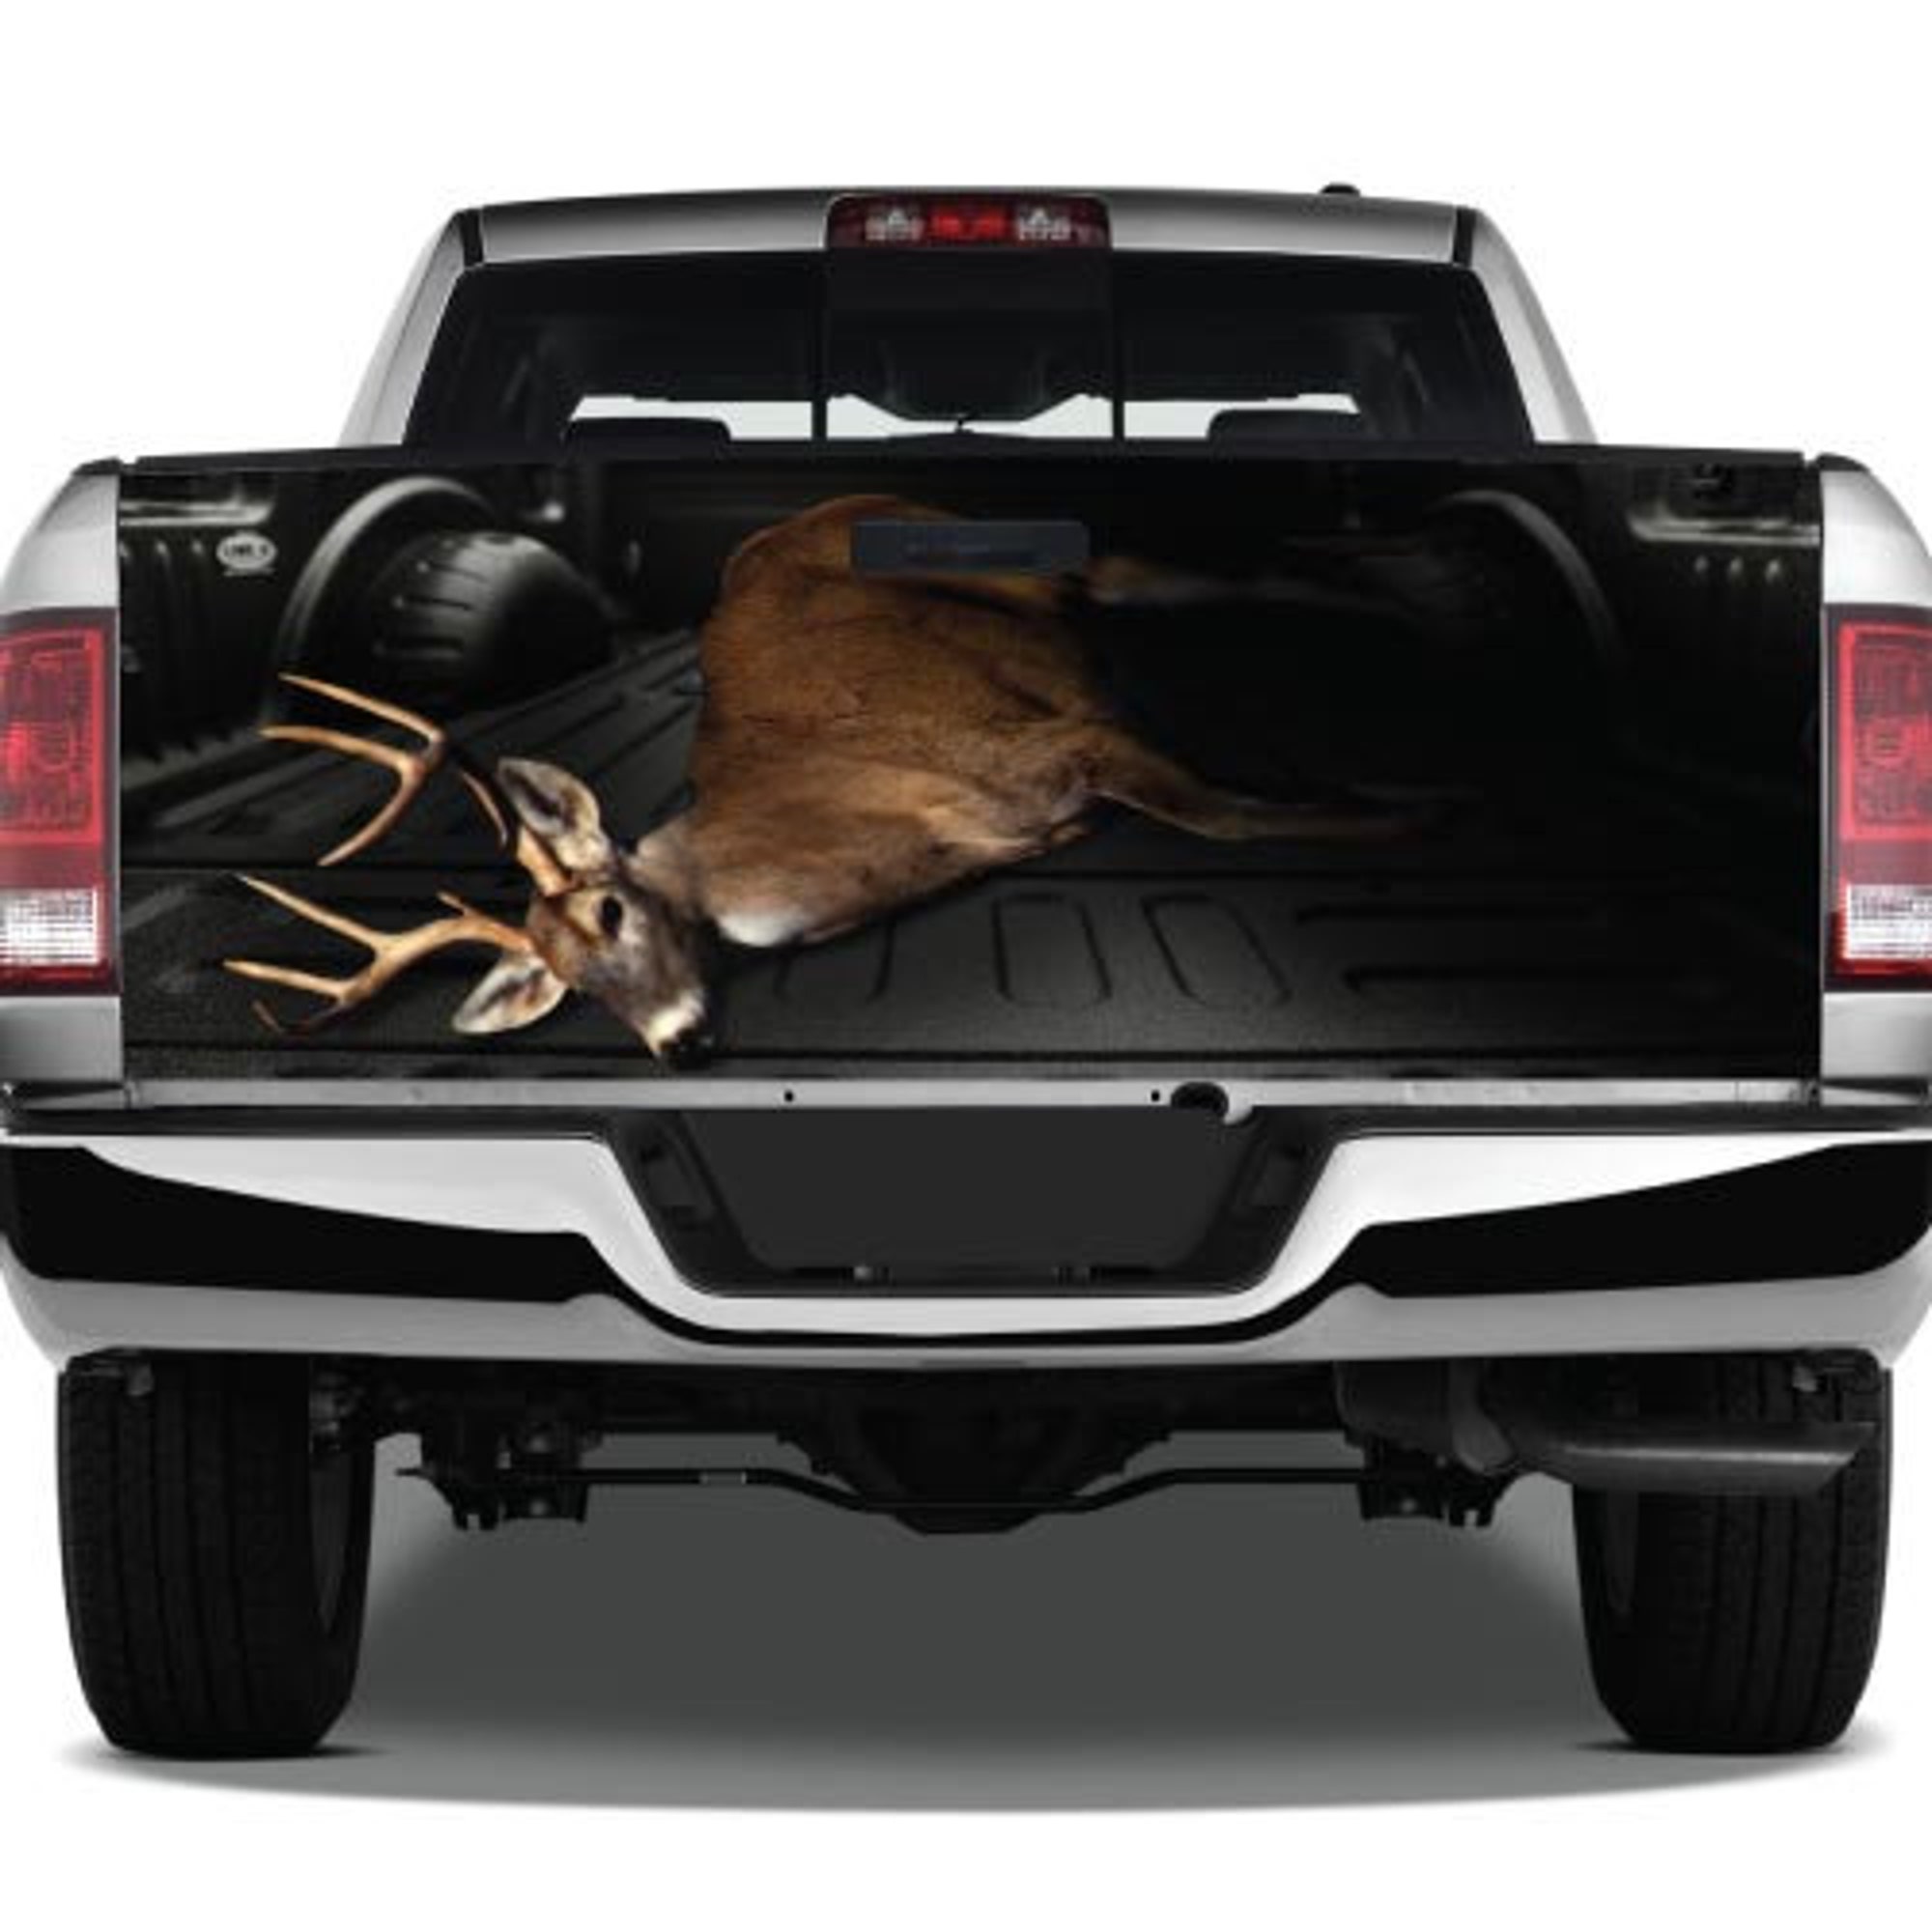 Dead Deer White-tail Buck Hunter Hunting Graphic Tailgate Vinyl Decal Truck Pickup Wrap